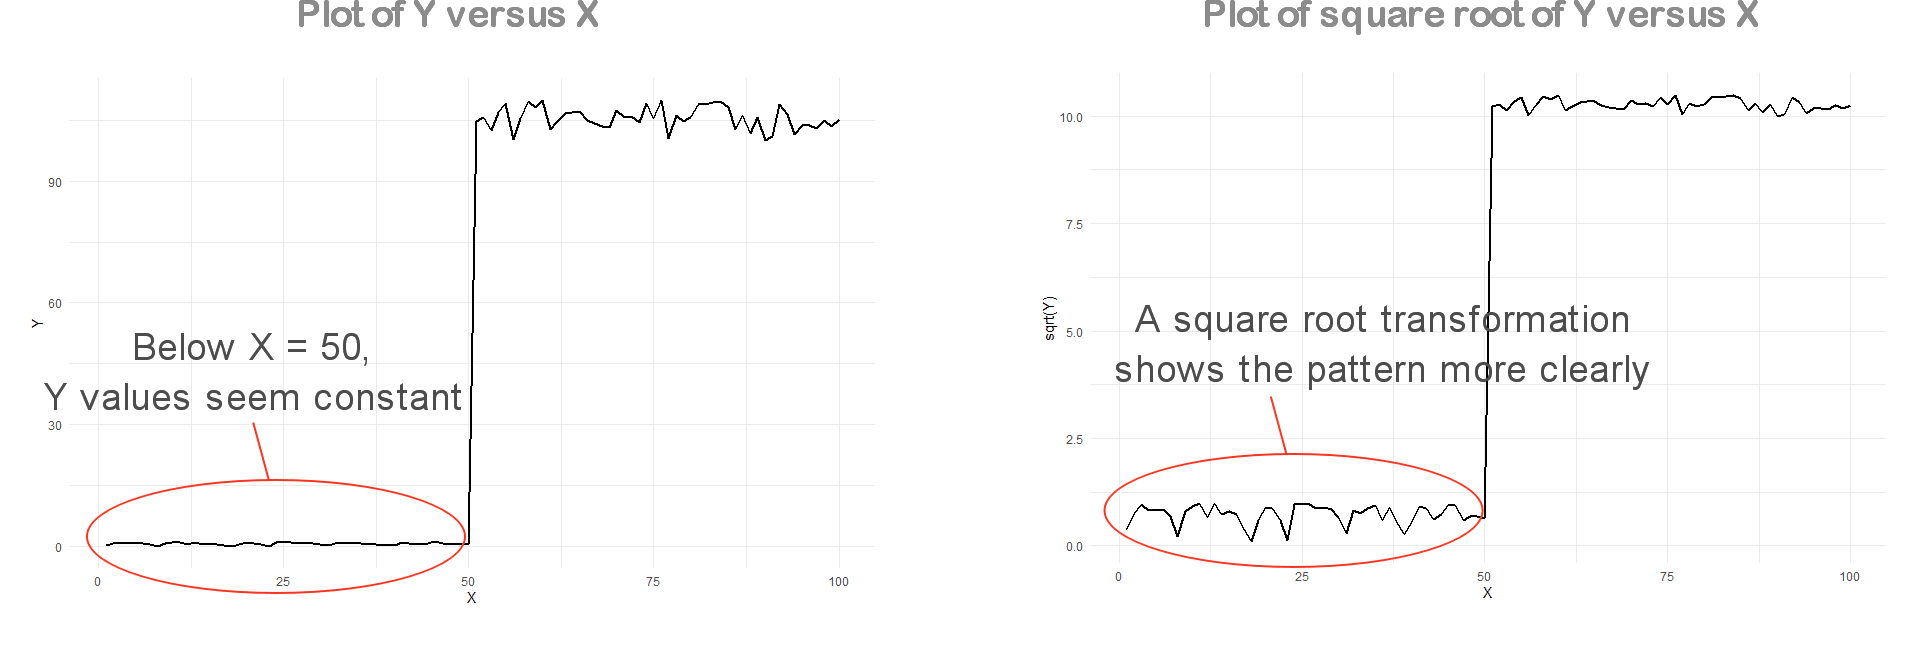 Square root transformation enables better focus on certain parts of the plot